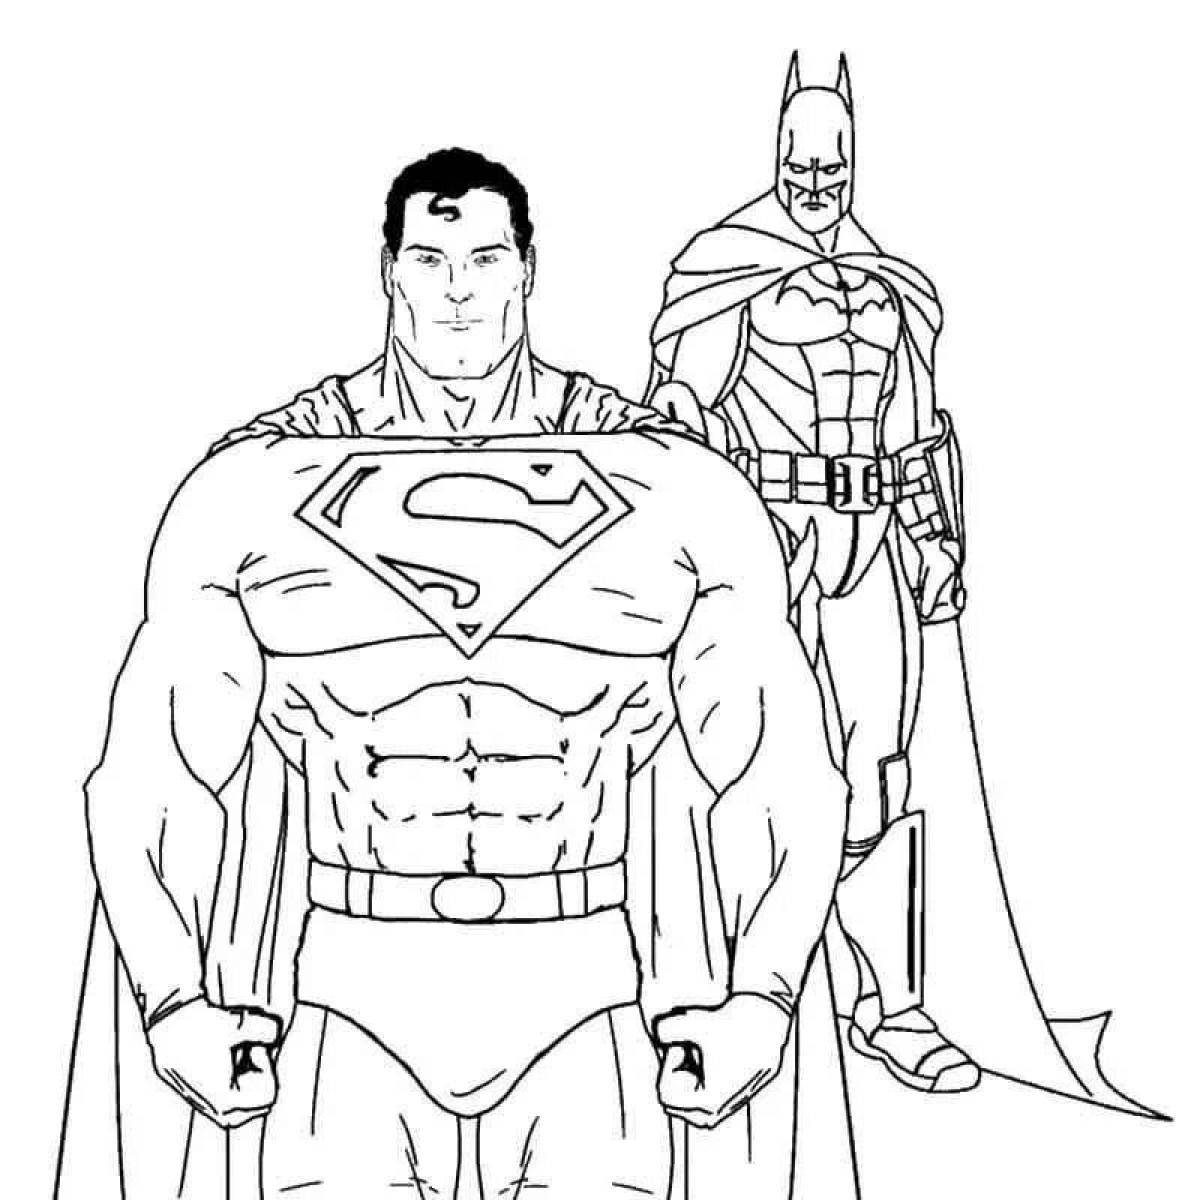 Outstanding superman coloring book for kids